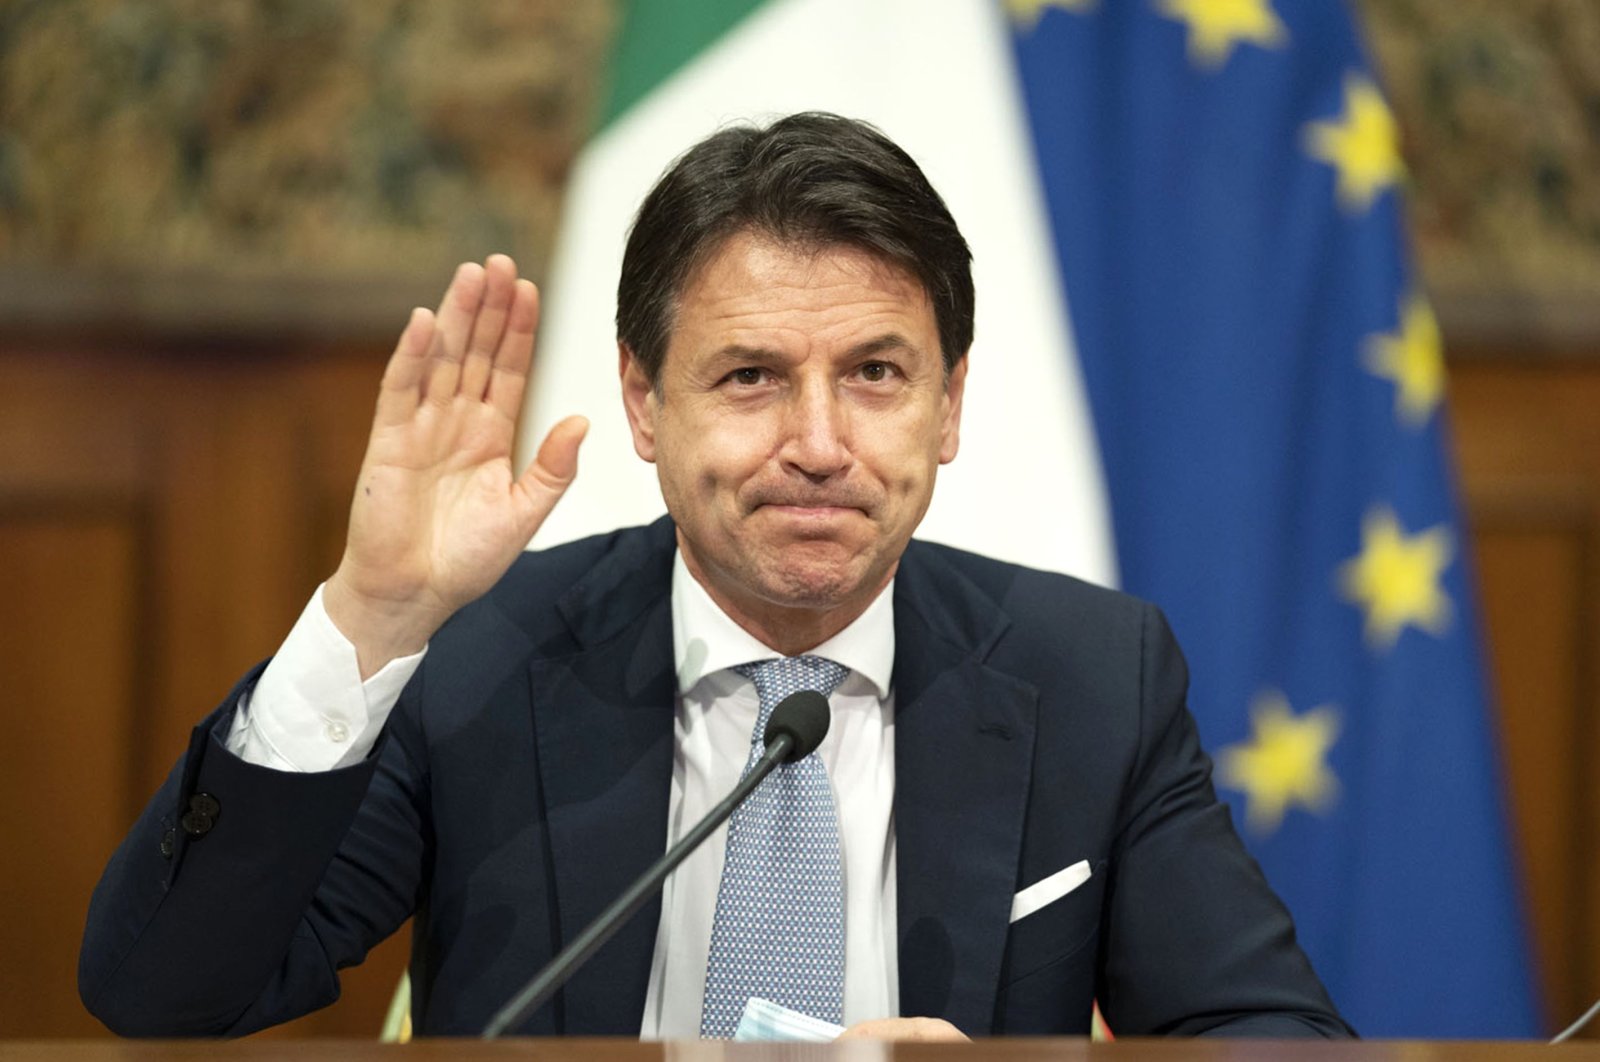 Italian Prime Minister Giuseppe Conte waves during a videoconference with members of the European Council on the EU response to the COVID-19 pandemic, Rome, Italy, Nov. 19, 2020. (AFP)